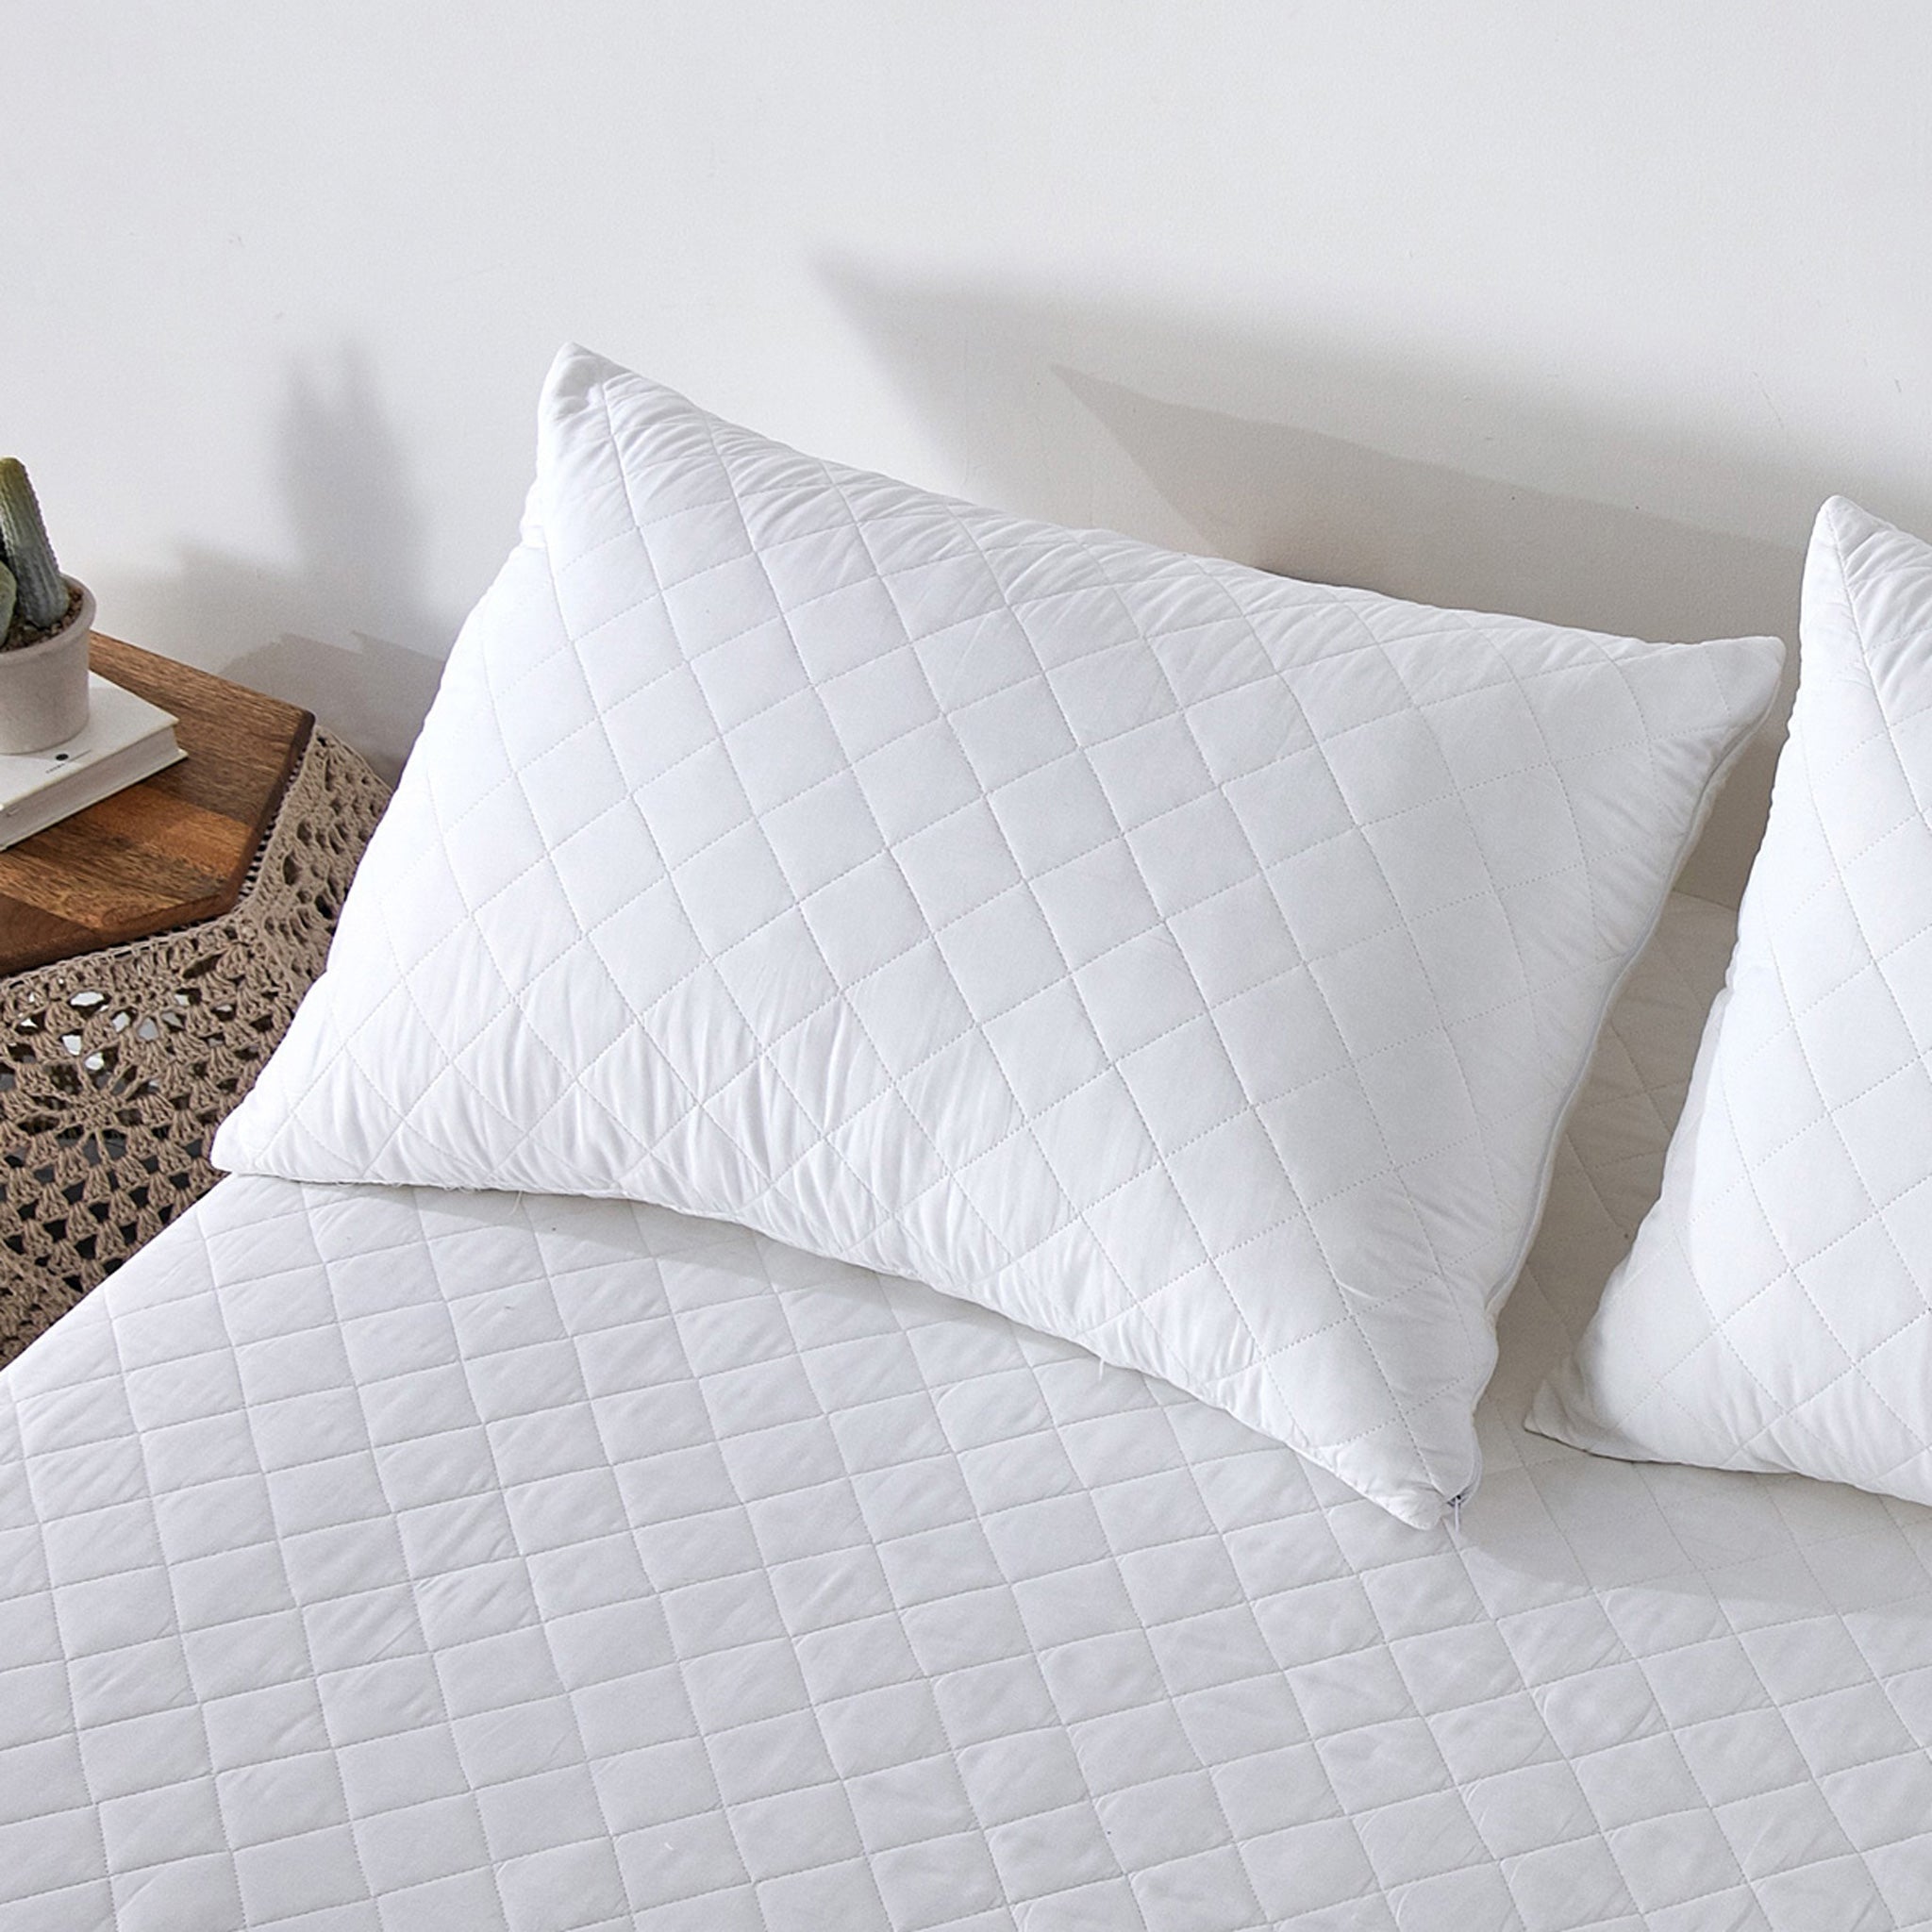 Complete Care Pillow Protector